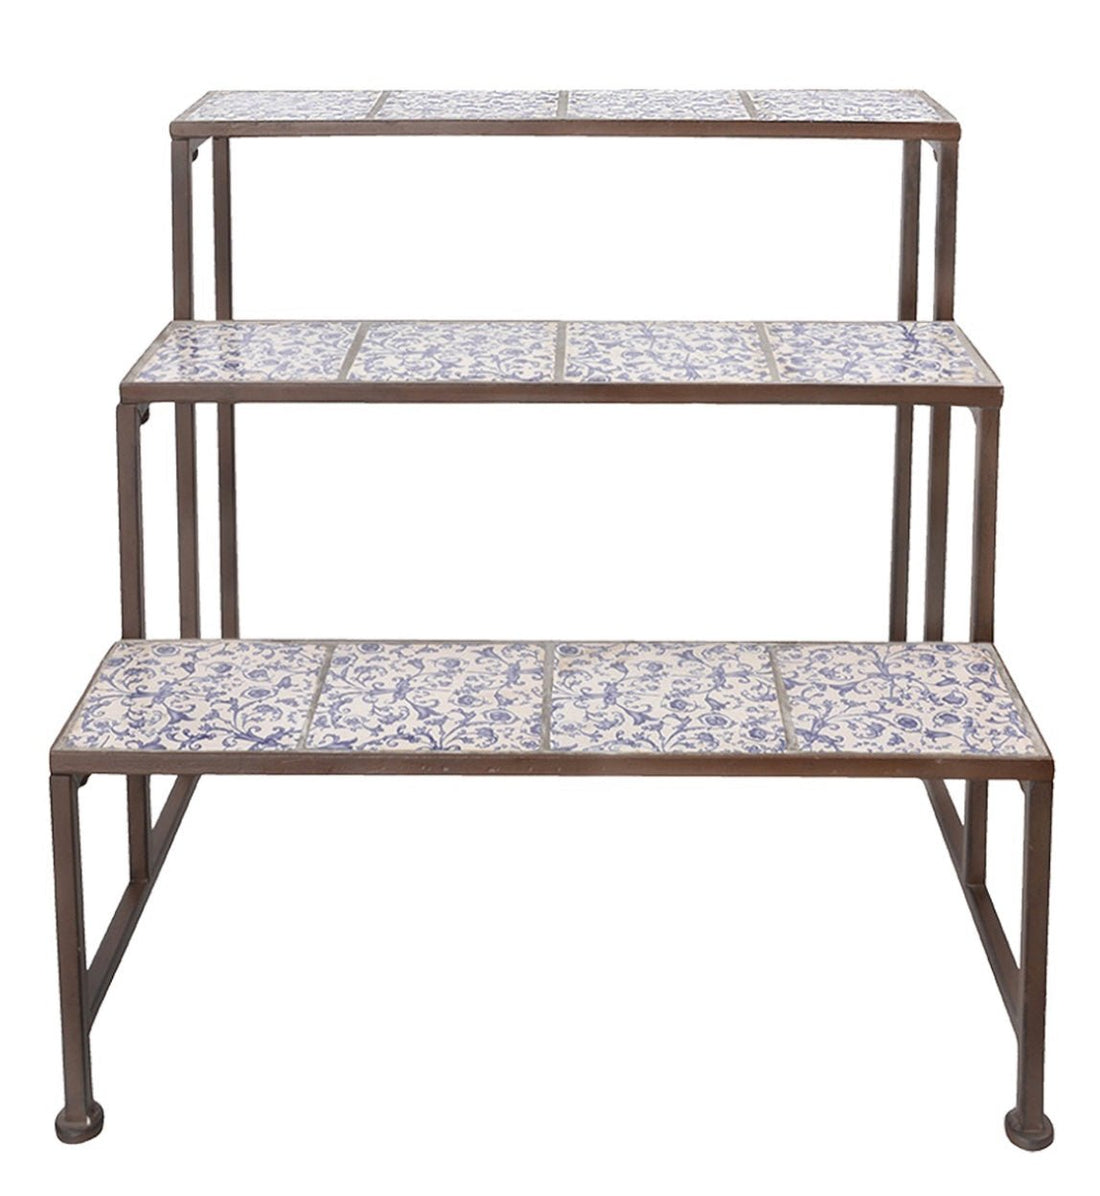 Aged Blue 3 Tier Plant Stand - The Flower Crate